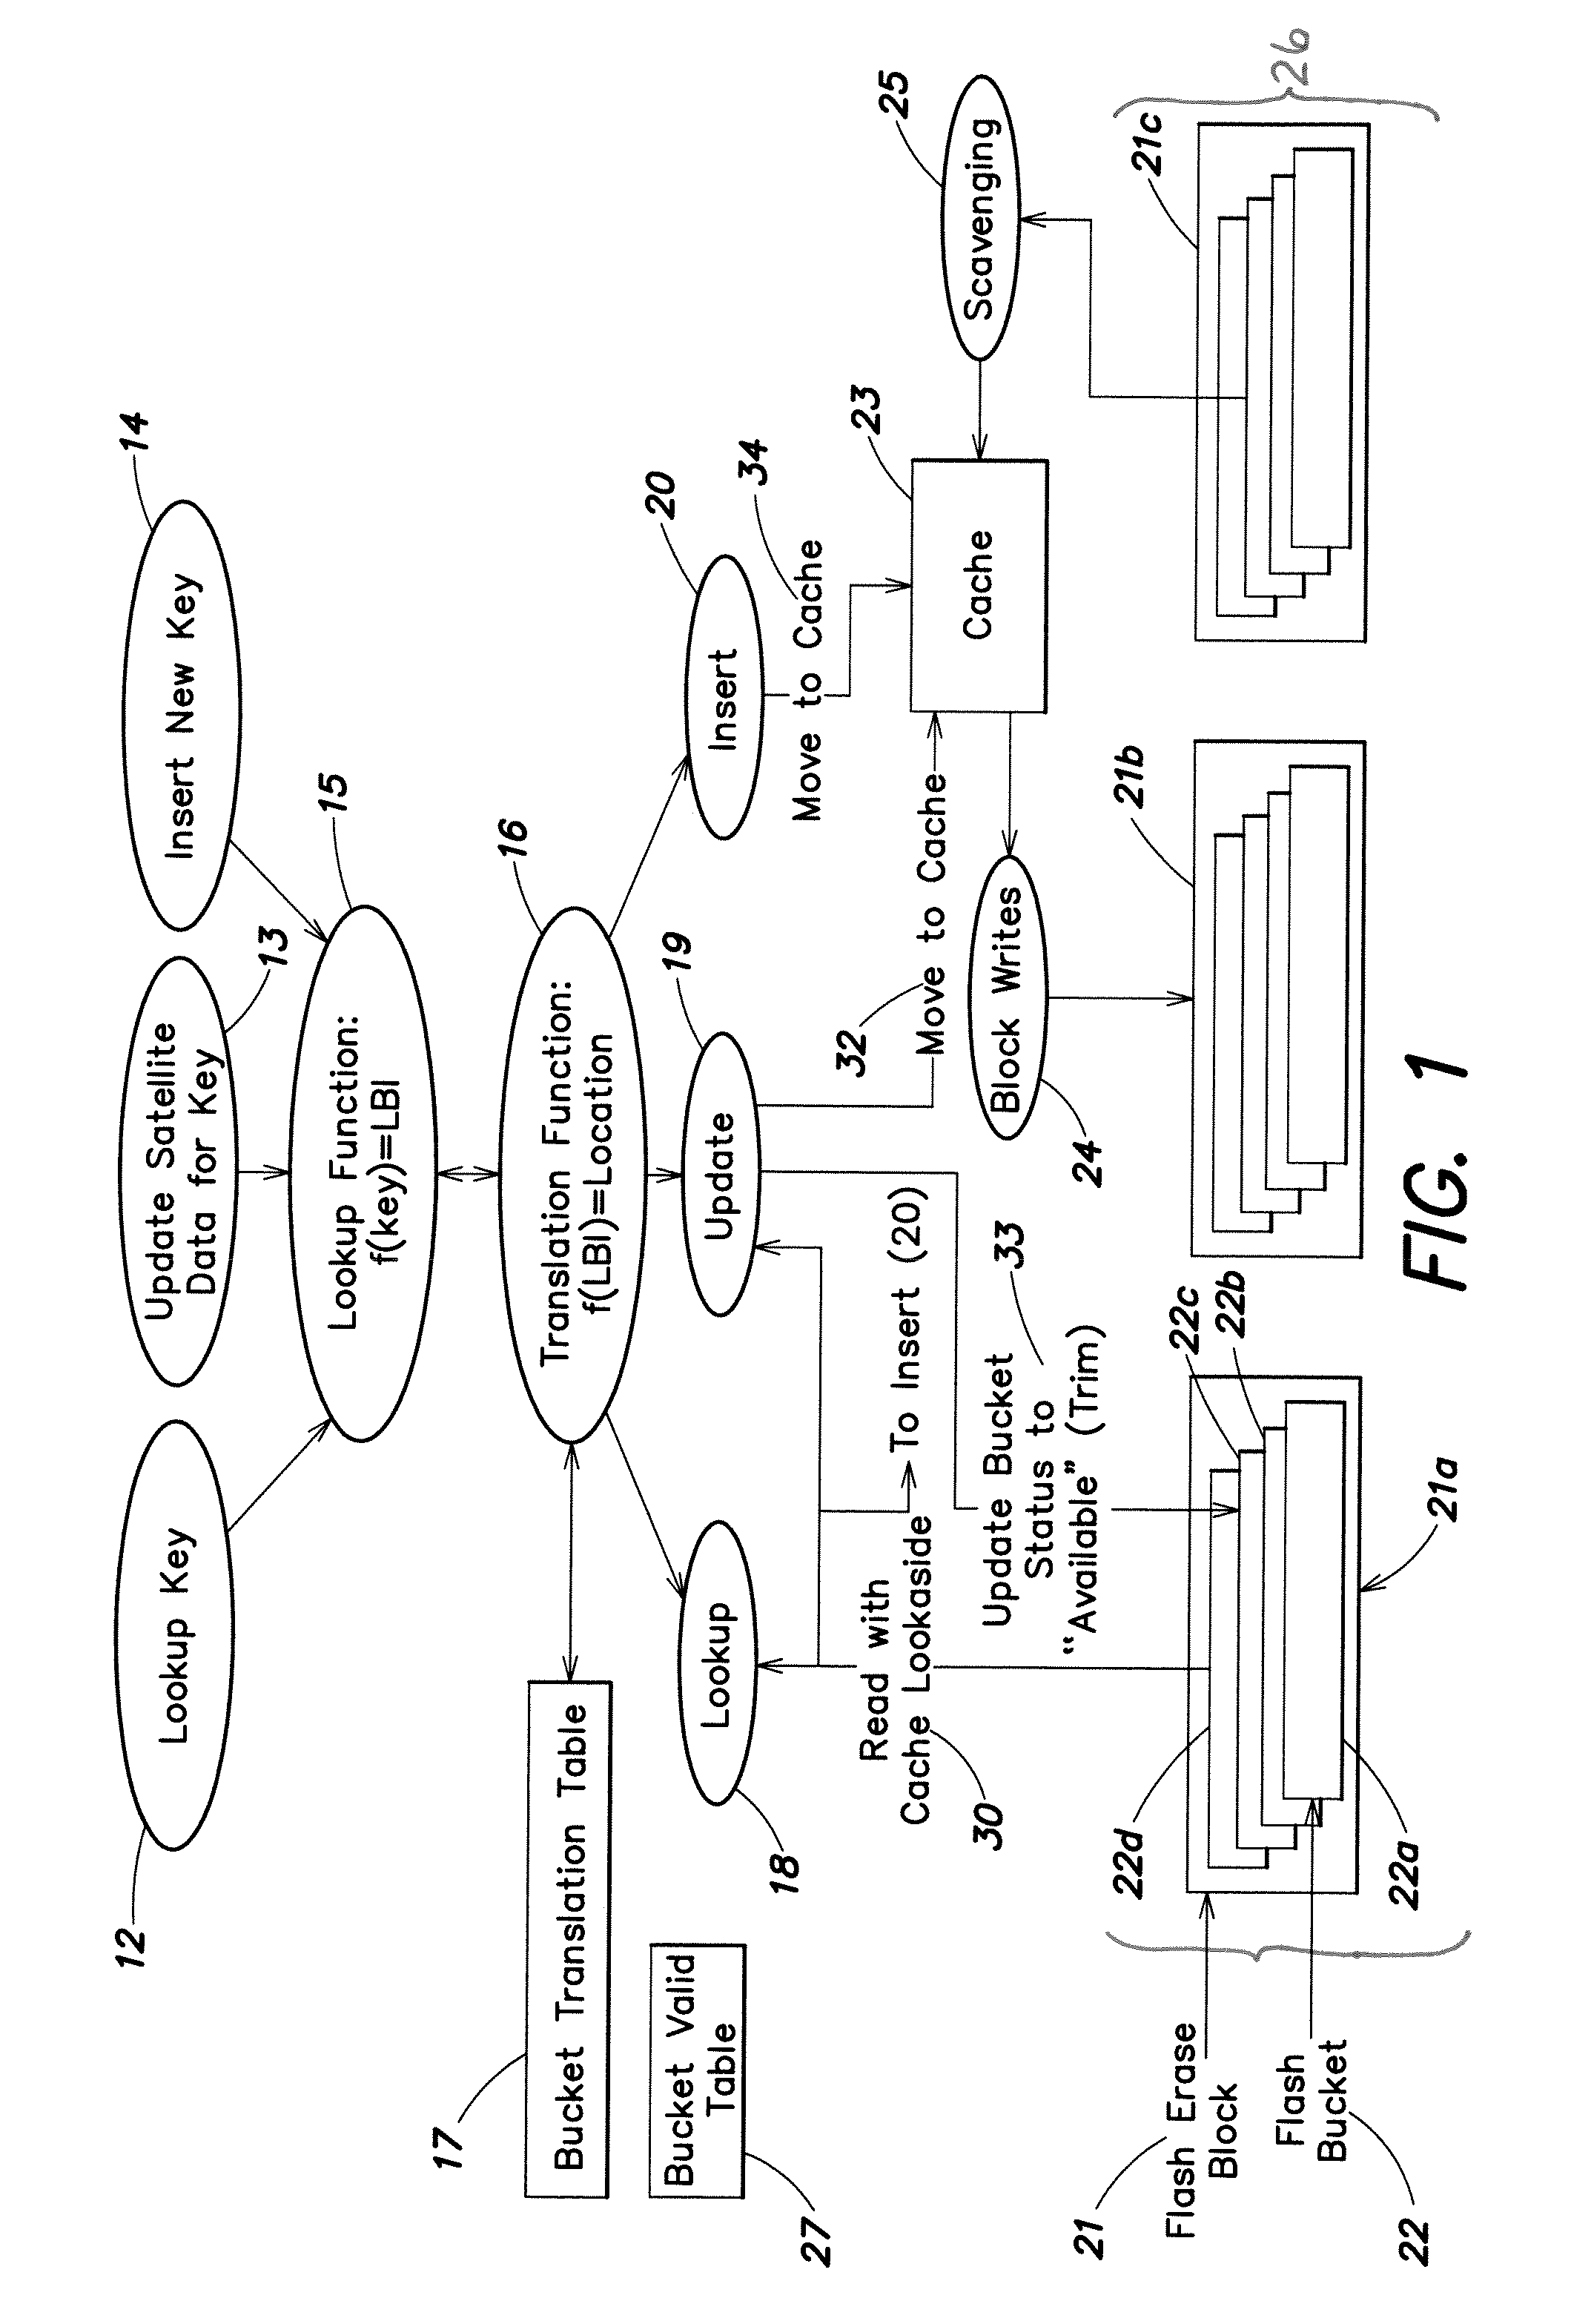 Method of adapting a uniform access indexing process to a non-uniform access memory, and computer system